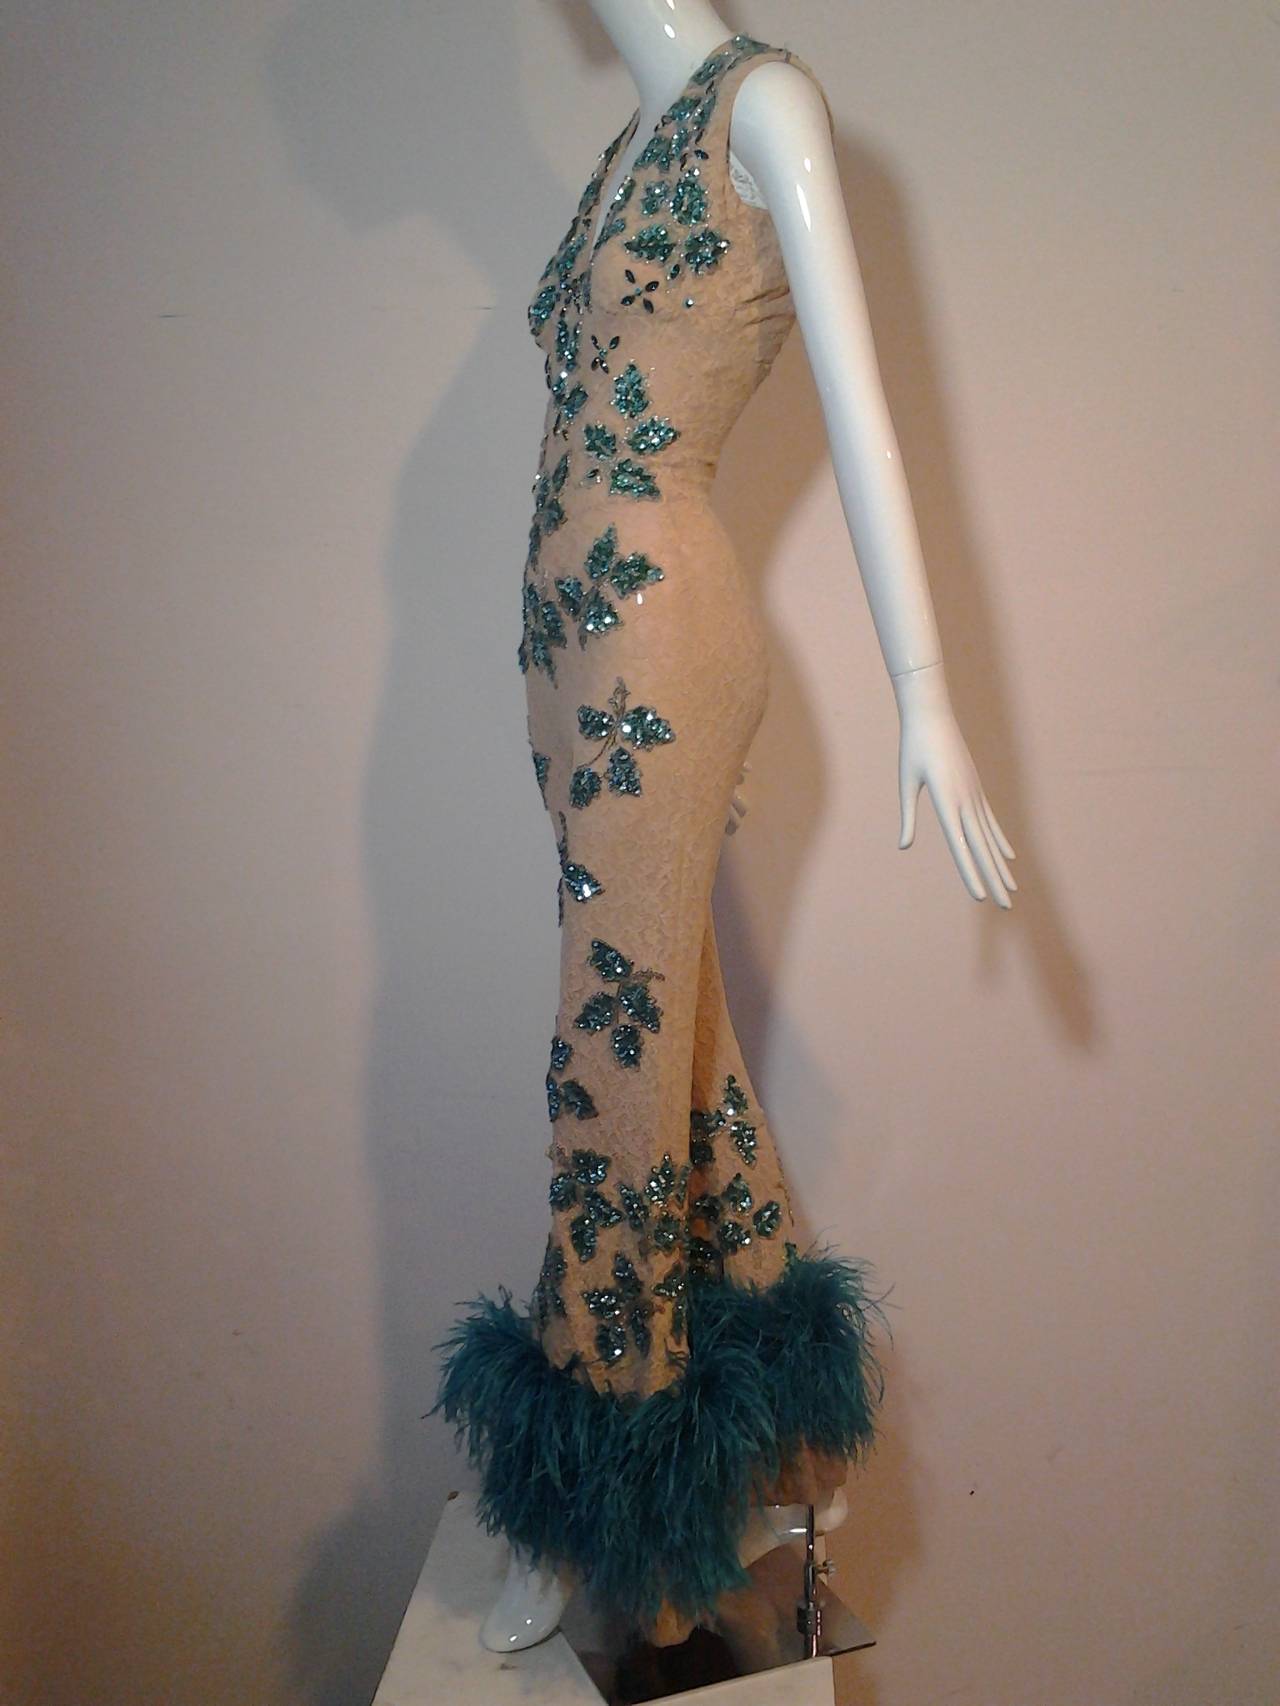 A fabulous 1960s Burlesque-style nude stretch lace jumpsuit:  Fully lined with sequin bead and rhinestone leaf and floral appliques in emerald green.  Pant hems are lavishly edged in turquoise ostrich feather trim. Zips up back, no bones.